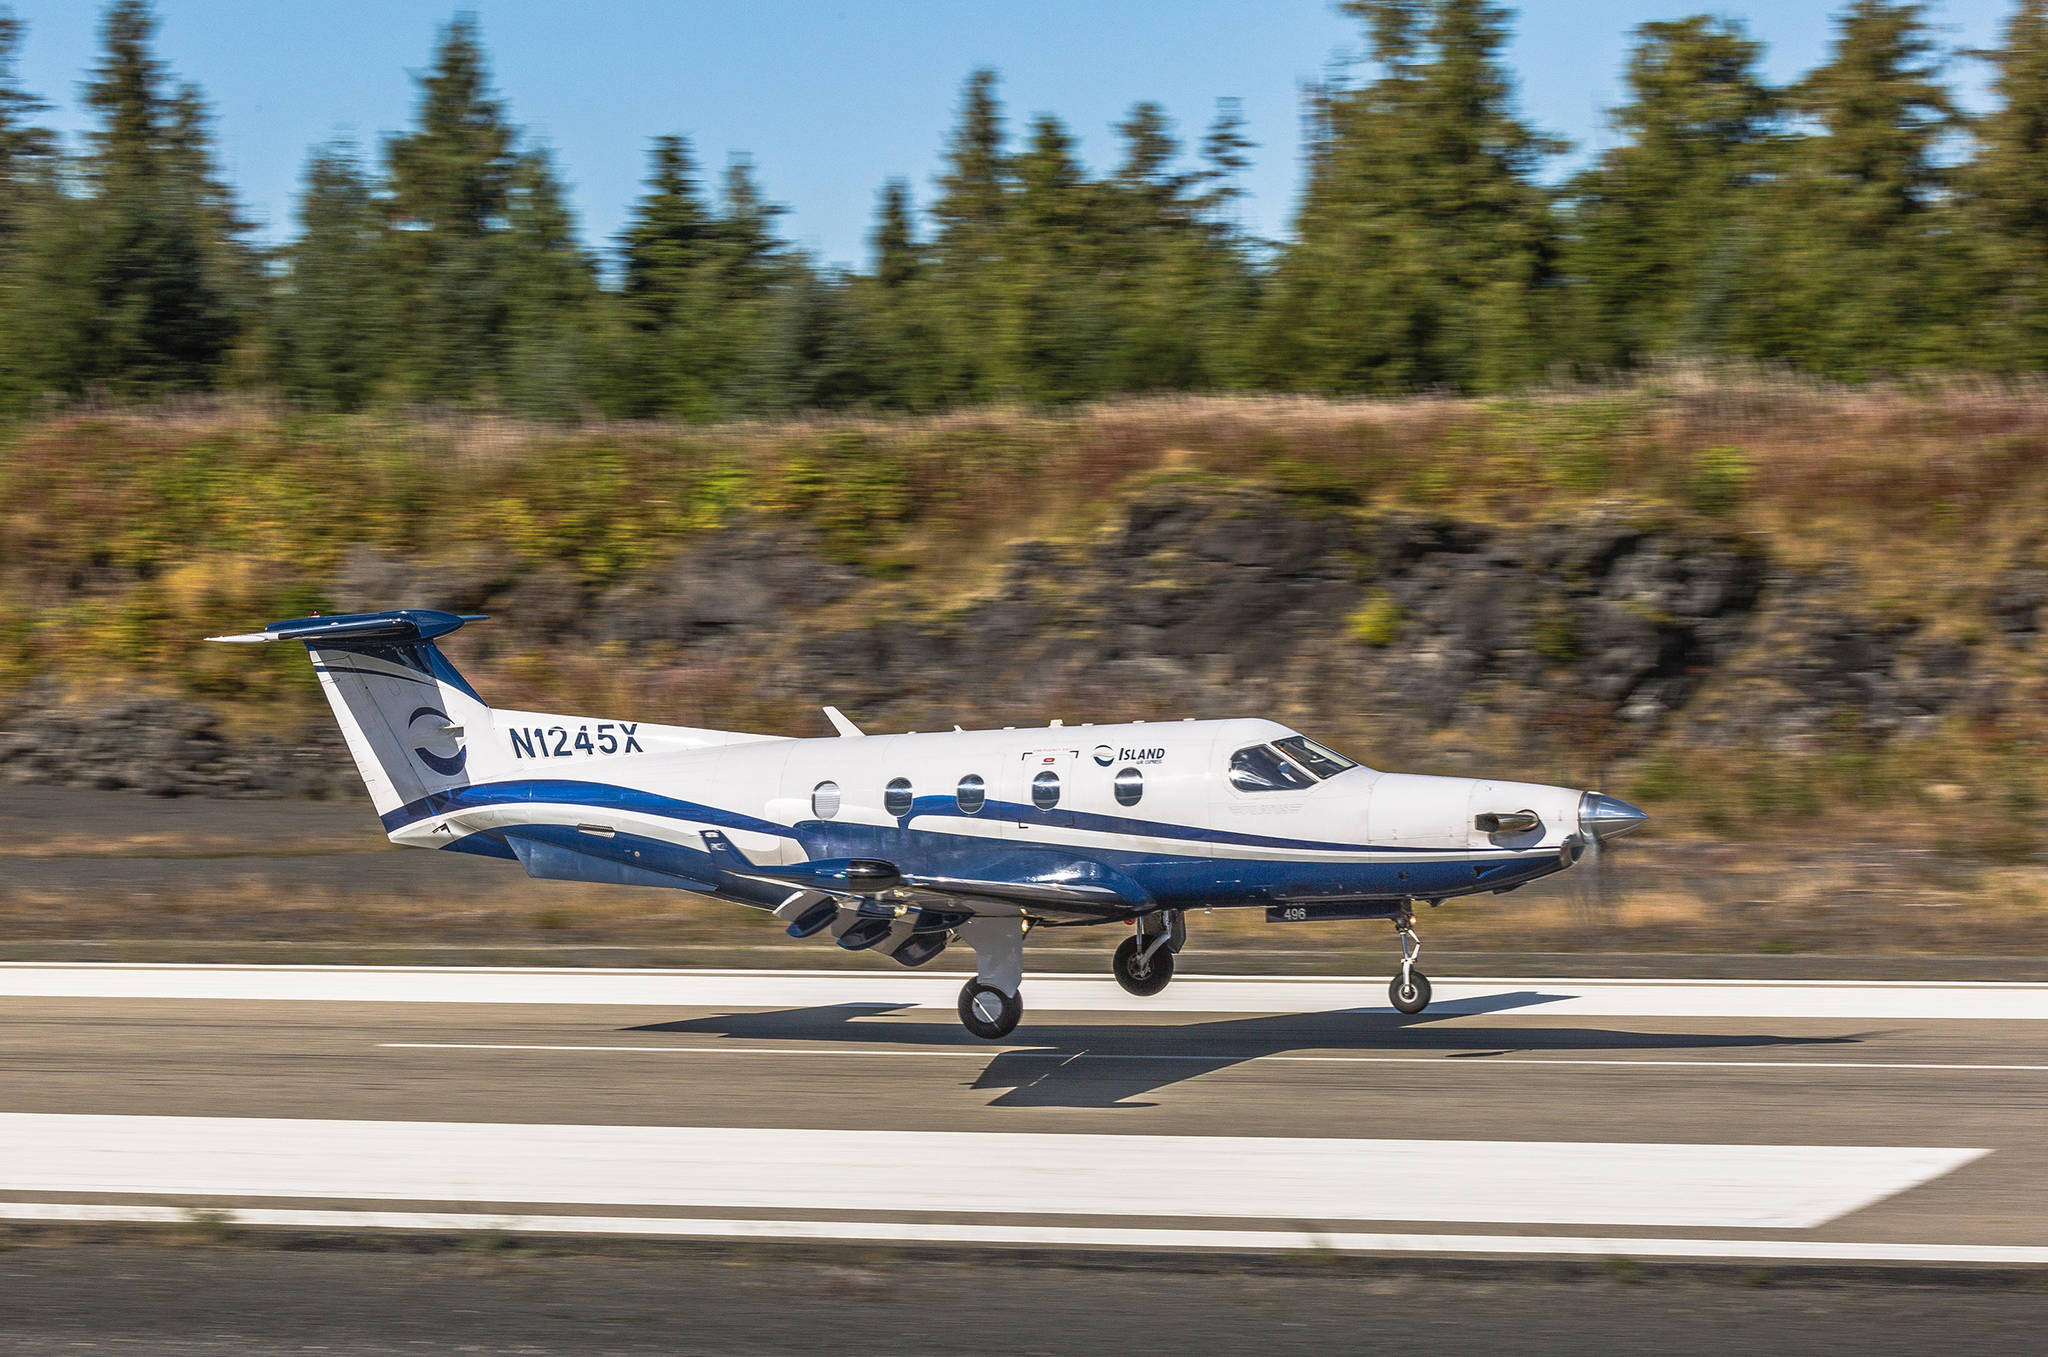 PC12 landing at Island Air’s Home base in Klawock in September 2018. (Photo courtesy of Heather Holt)